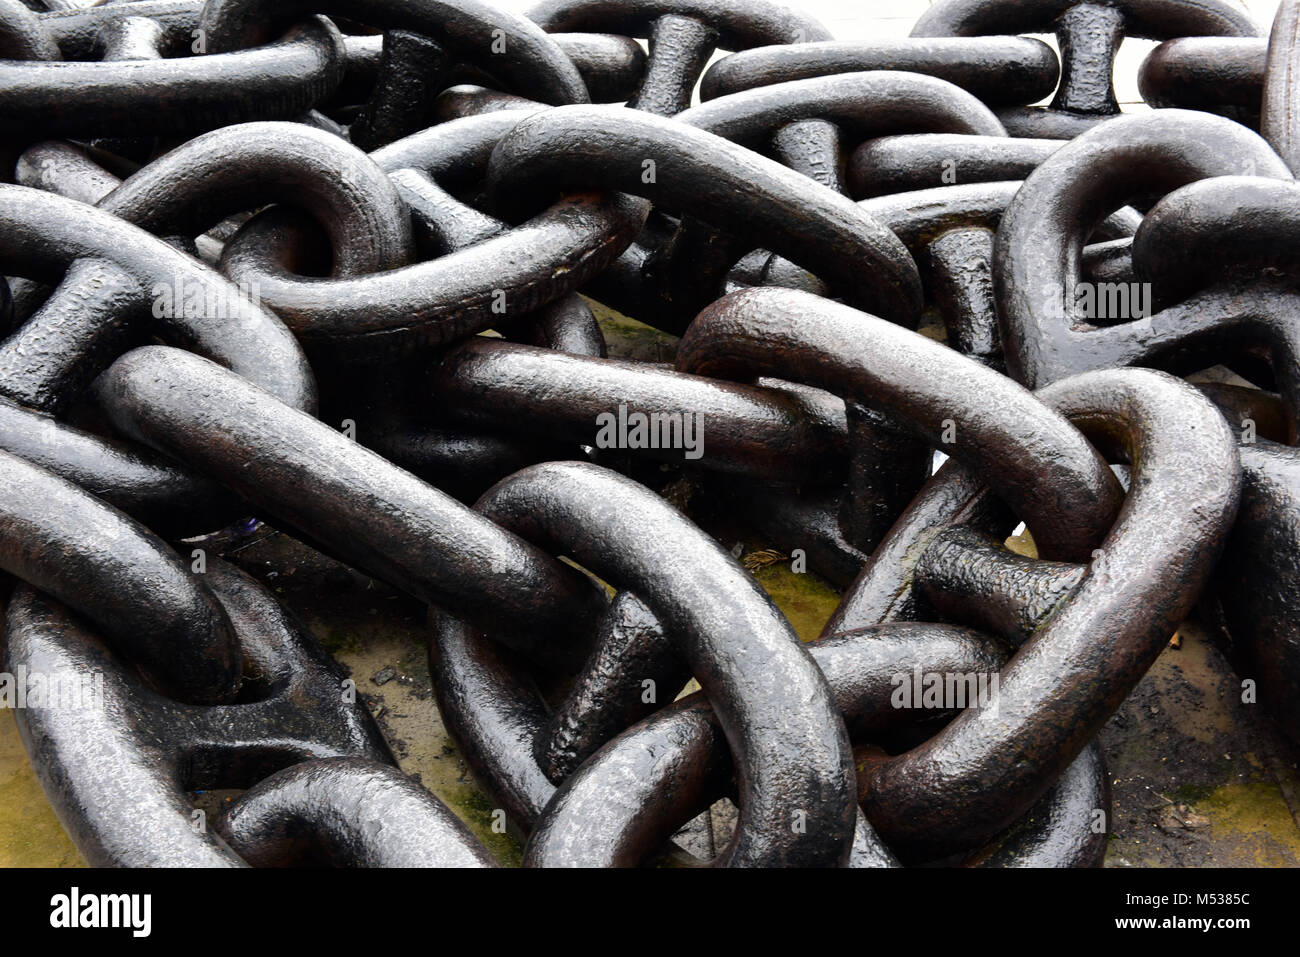 a very large chain used for a ships anchor with specially engineered links and lugless joining shackles. Large wet rusty and corroded mooring chains. Stock Photo